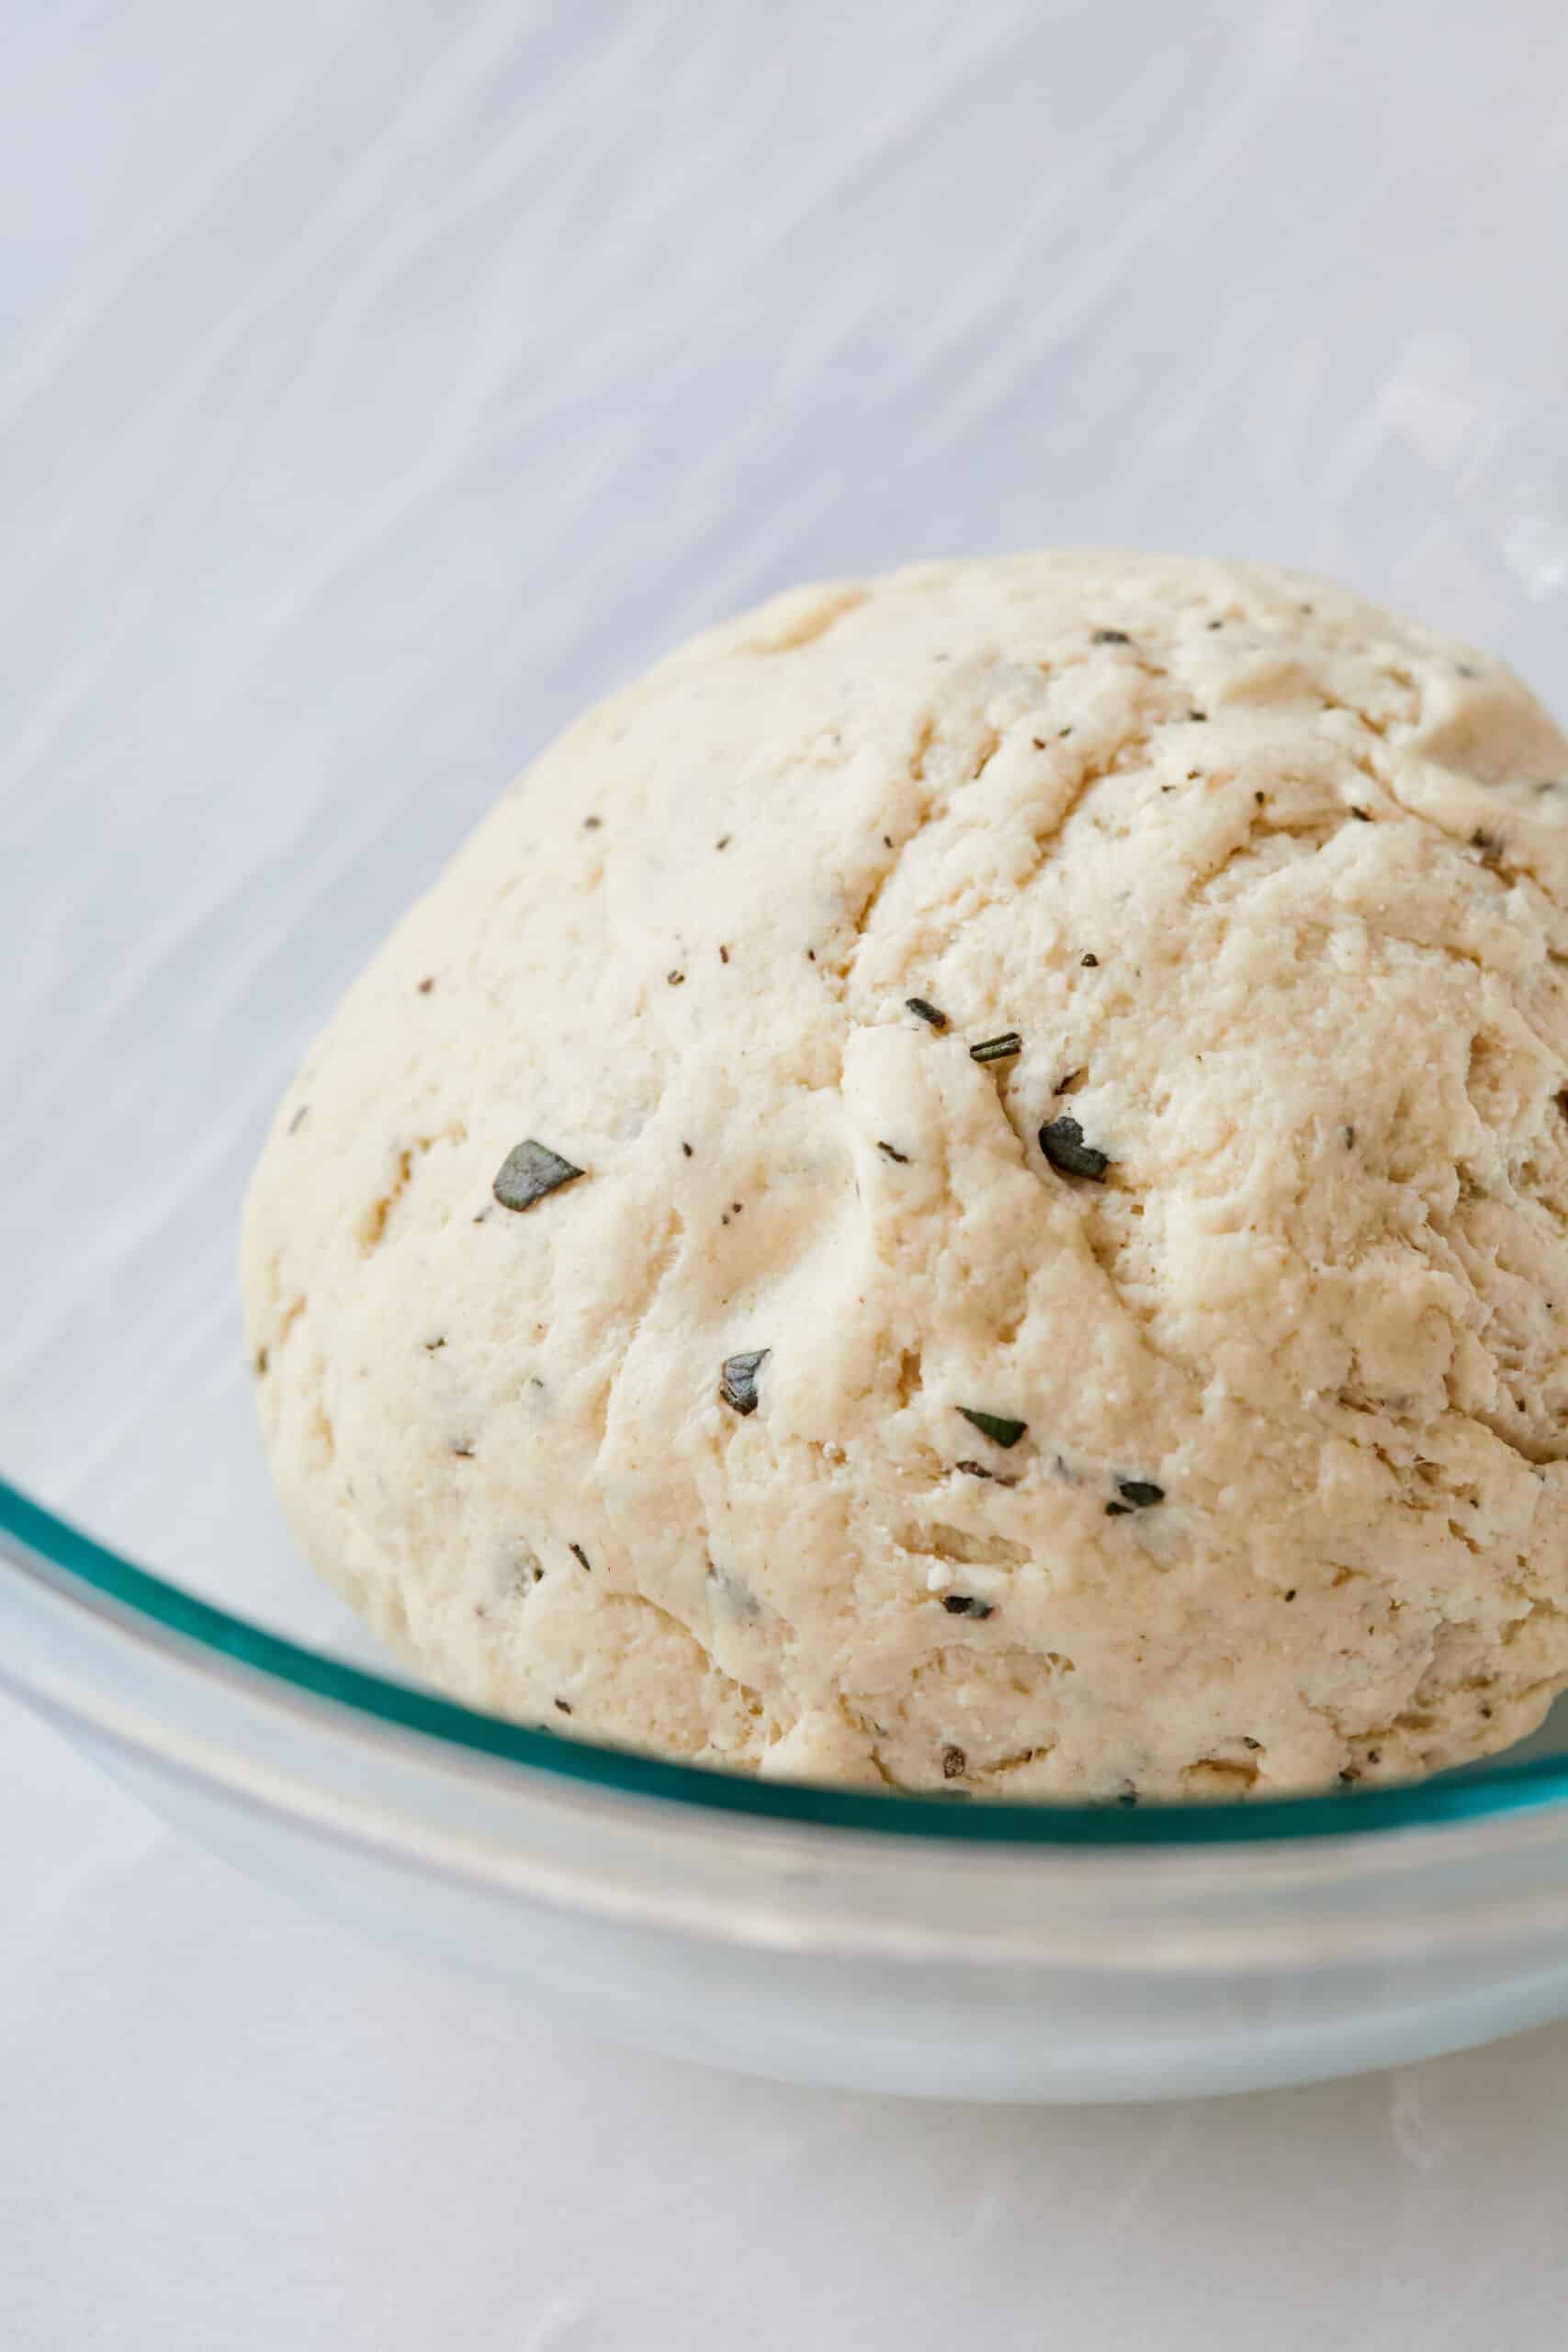 Step-by-step instructions on how to Make Carta di Musica: combine dry ingredients and wet ingredients then knead until a smooth dough is formed.